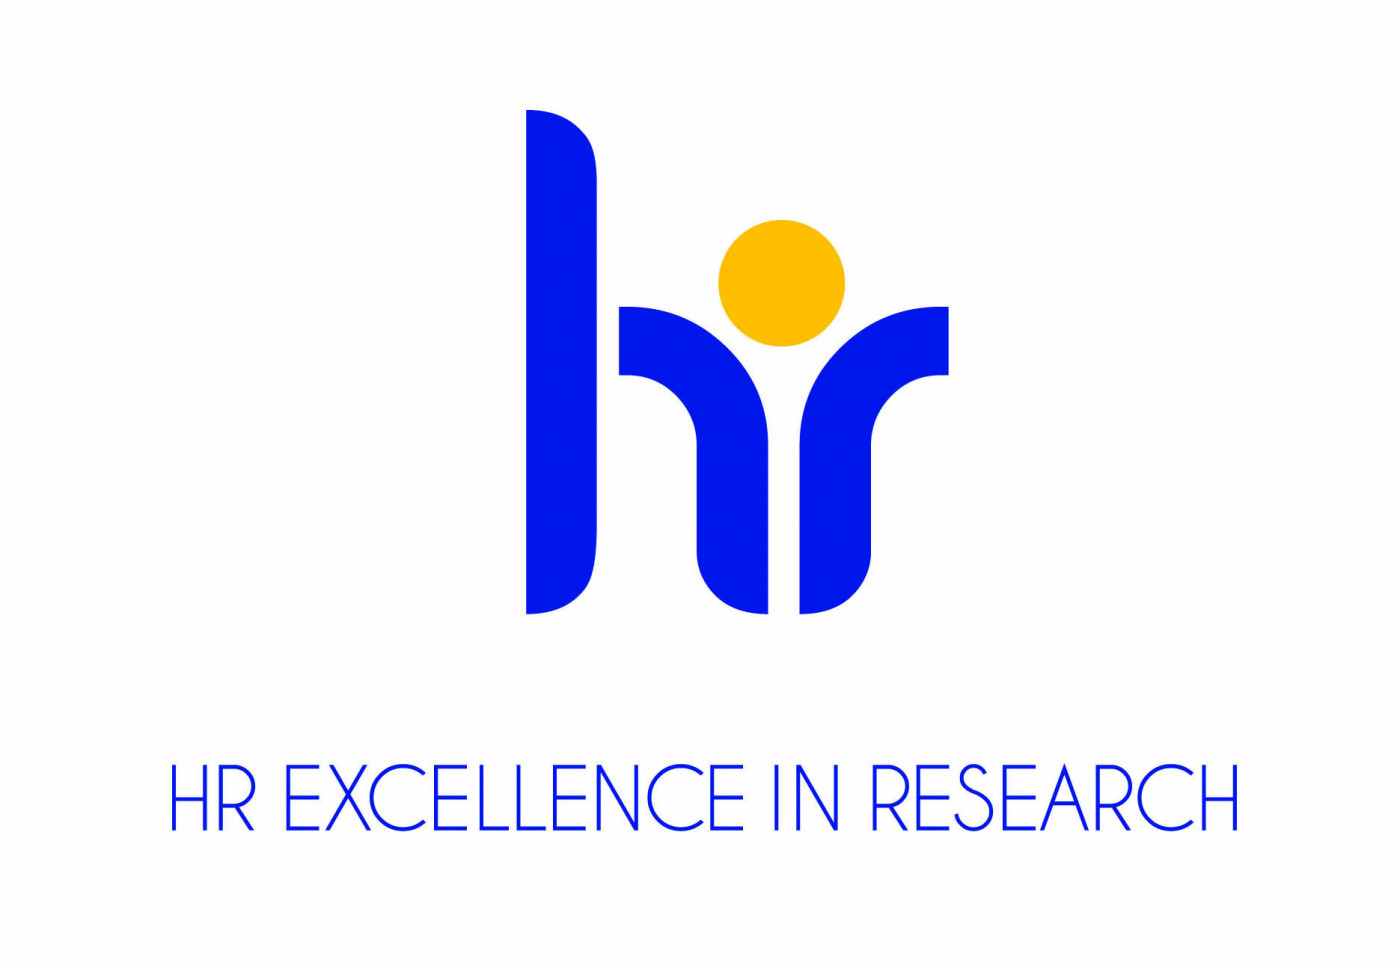 HR excellence in research logo